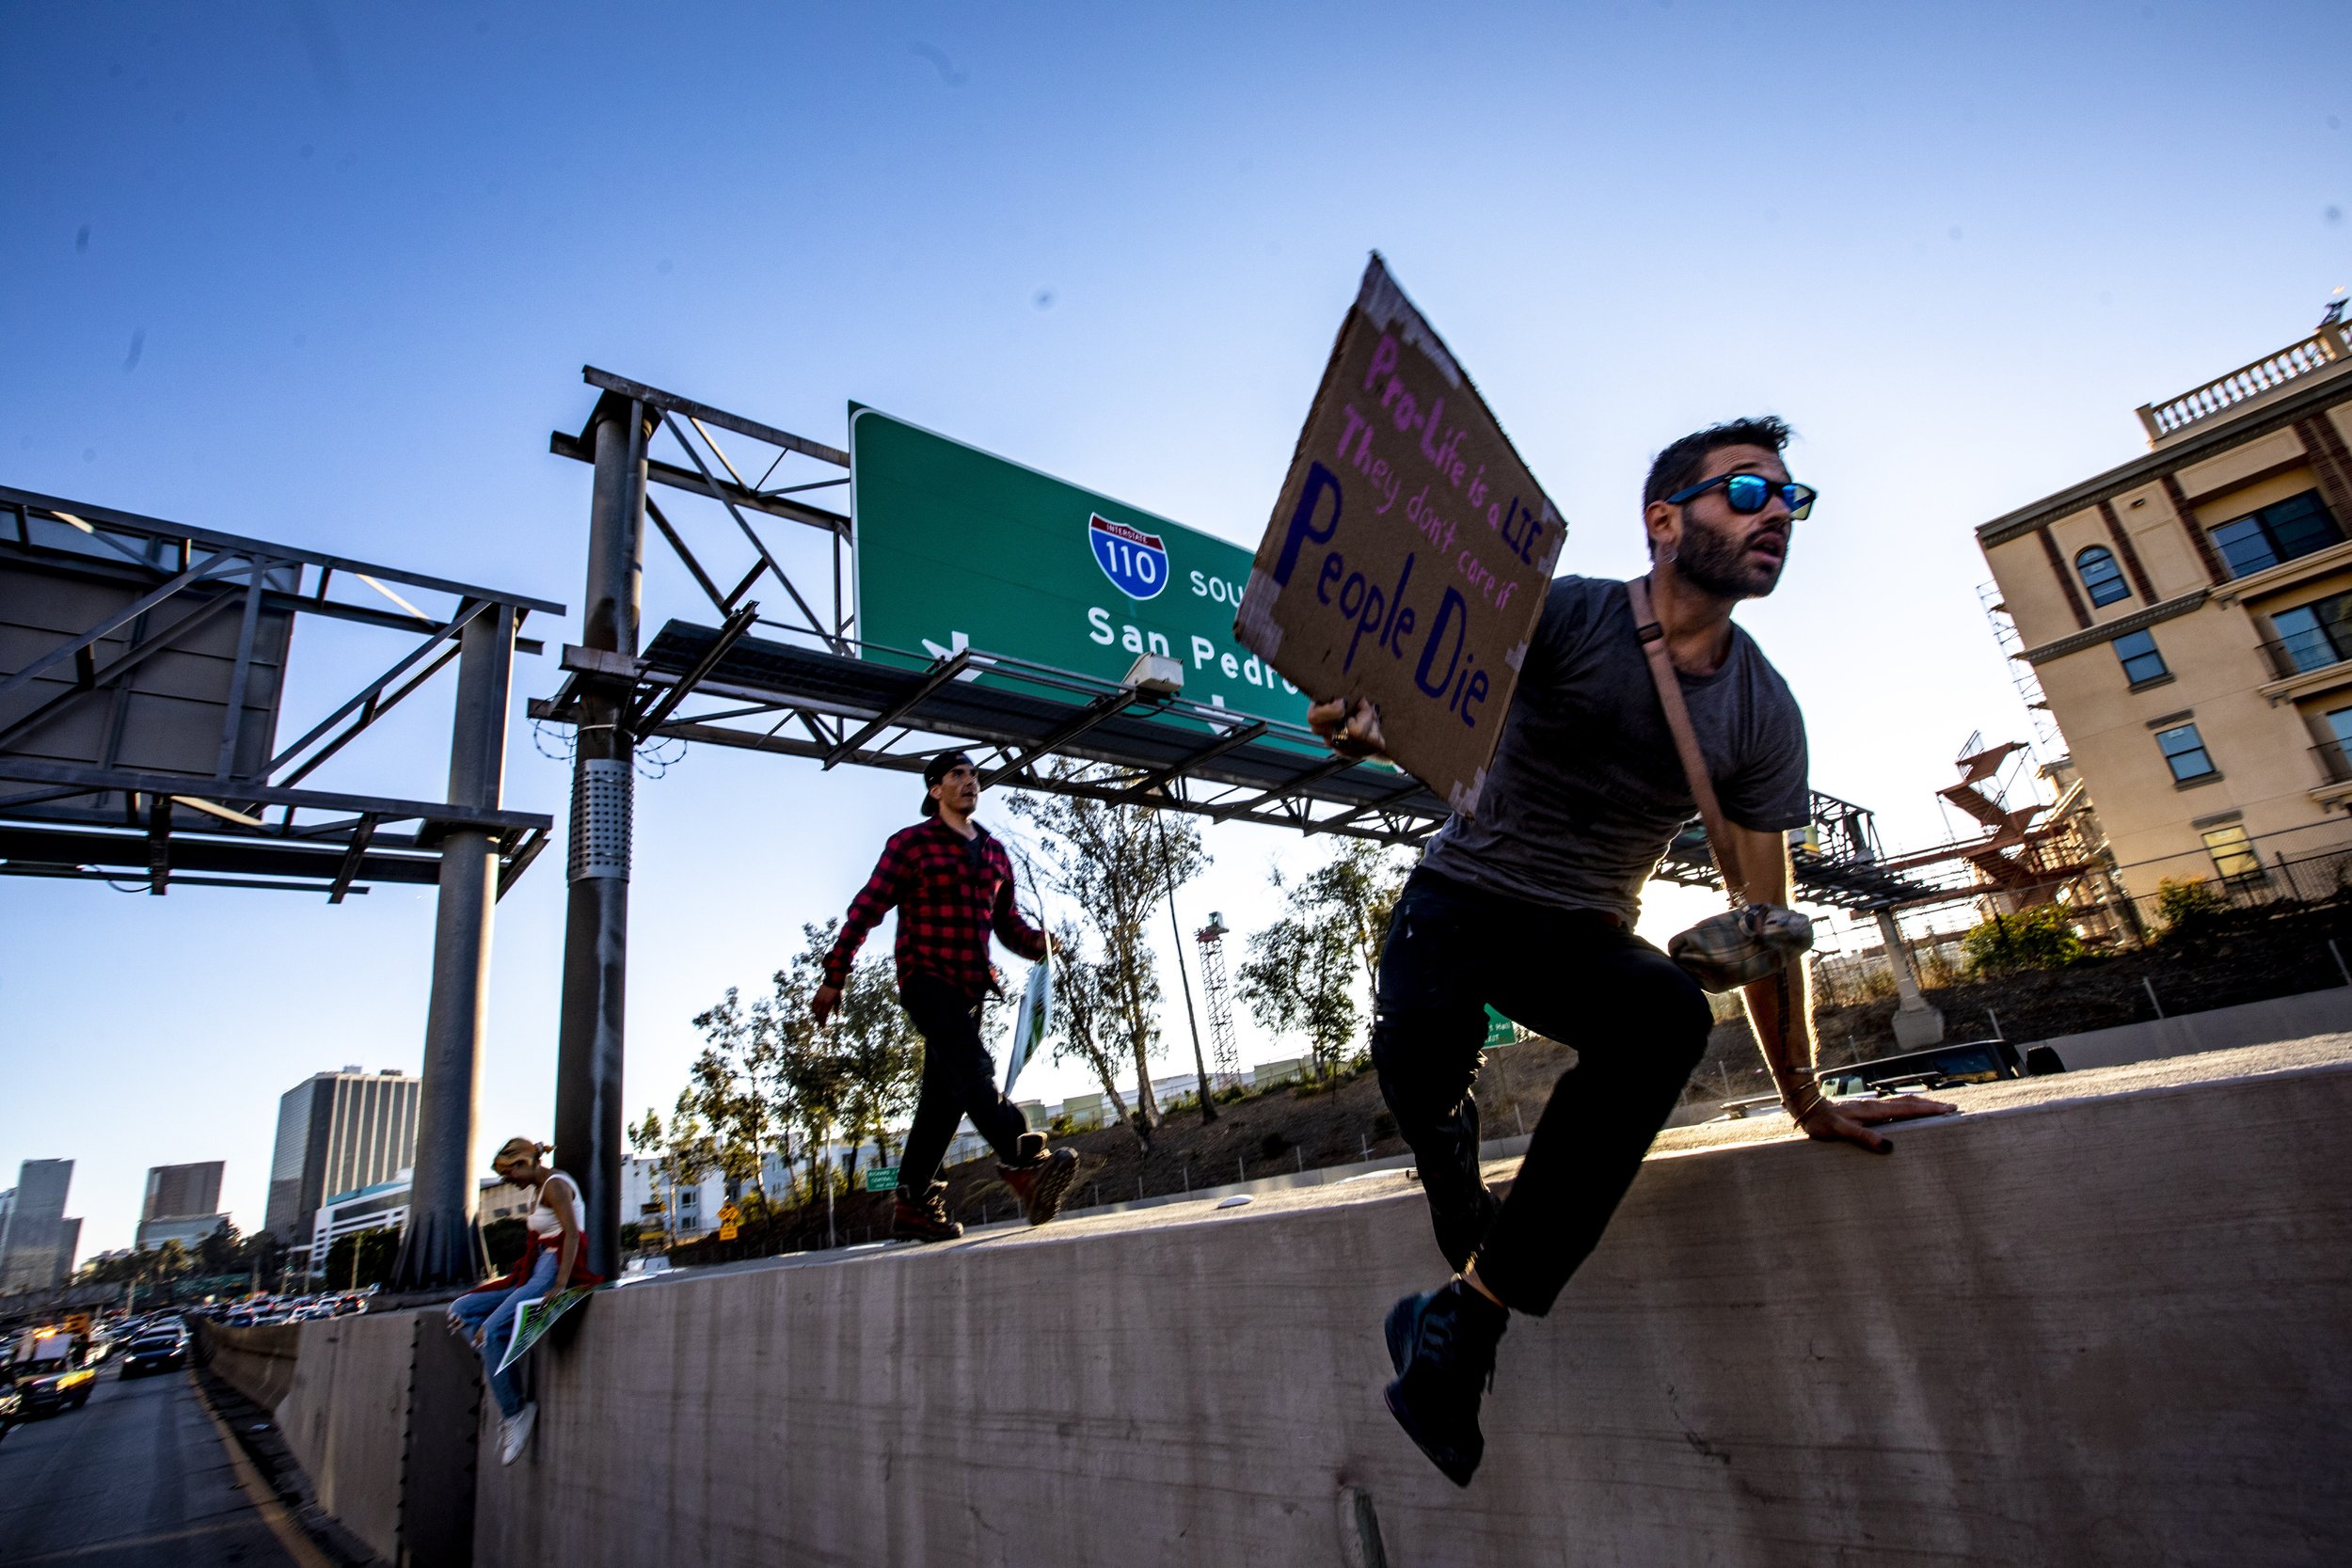  Activists protesting against the Supreme Court's Decision to overturn Roe v. Wade marched onto the 110 Freeway in Downton  Los Angeles. The March was organized by Rise Up 4 Abortion Rights LA. 